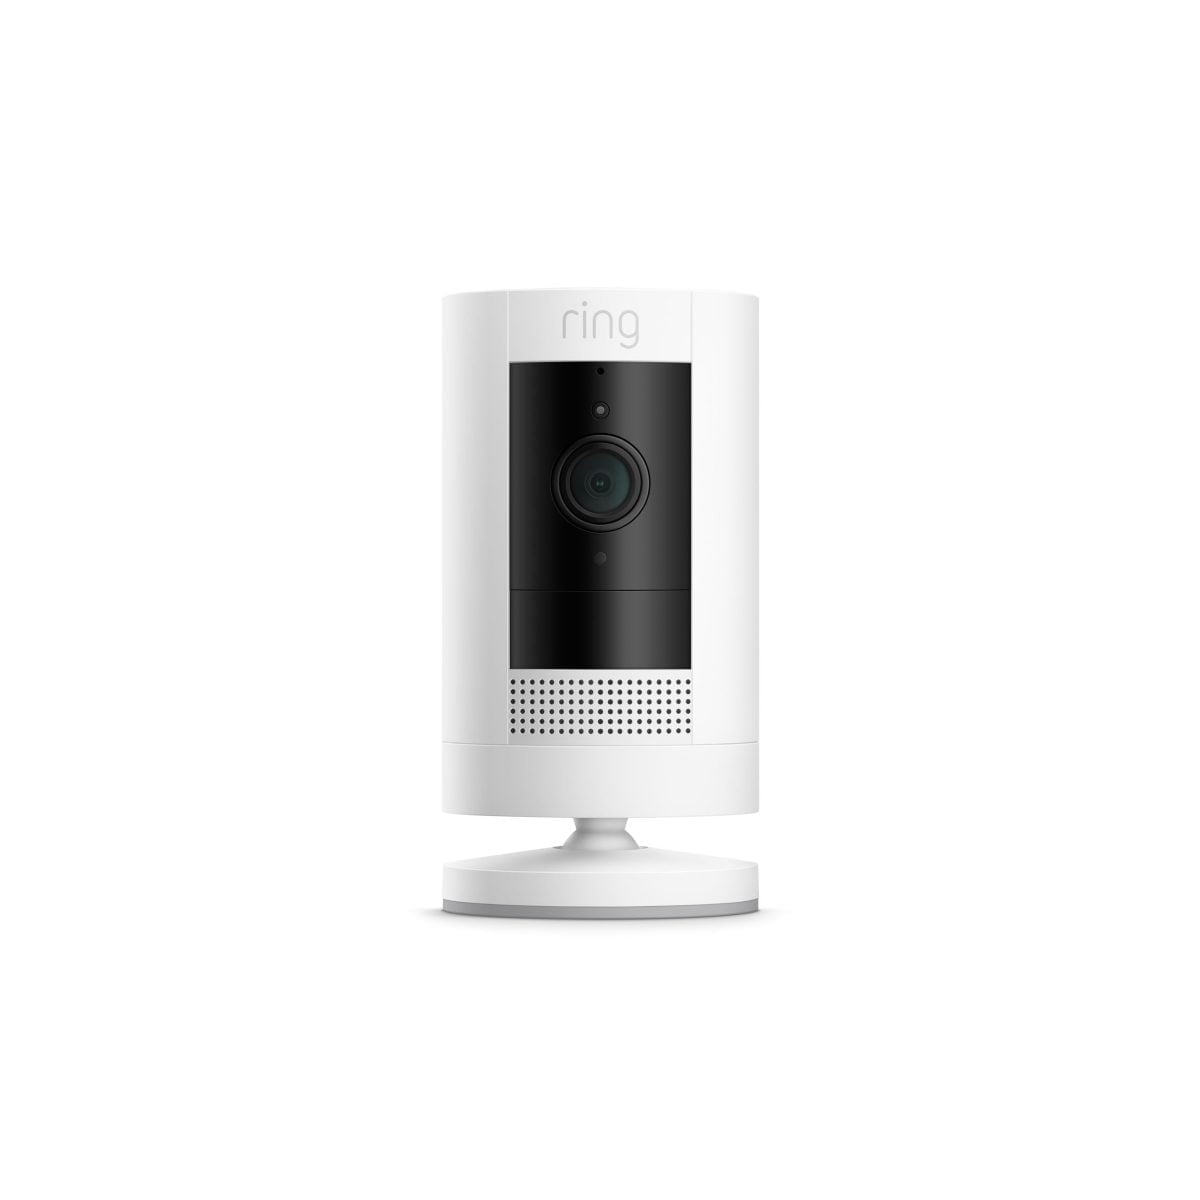 2019 Device Suc Batt White Scaled Ring Https://Youtu.be/Sdouokk6Eyk Add Security Inside Or Out With A Versatile Camera That Goes Almost Anywhere. Ring Stick Up Cam Battery Is An Indoor/Outdoor Camera That Sends Notifications To Your Phone And Tablet Whenever Motion Is Detected. Answer The Notification, And You Can See, Hear, And Speak To People On Camera From Anywhere. Place It On A Flat Surface So You Can Move It When You Need To. Or Mount It To A Wall For More Permanent Placement. With Ring Stick Up Cam Battery, You’ll Always Be Connected To Home So You Can See What’s Happening At Any Time. One Year Manufacturer Warranty Ring Indoor/Outdoor 1080Hd Security Battery Cam With Two Way Talk